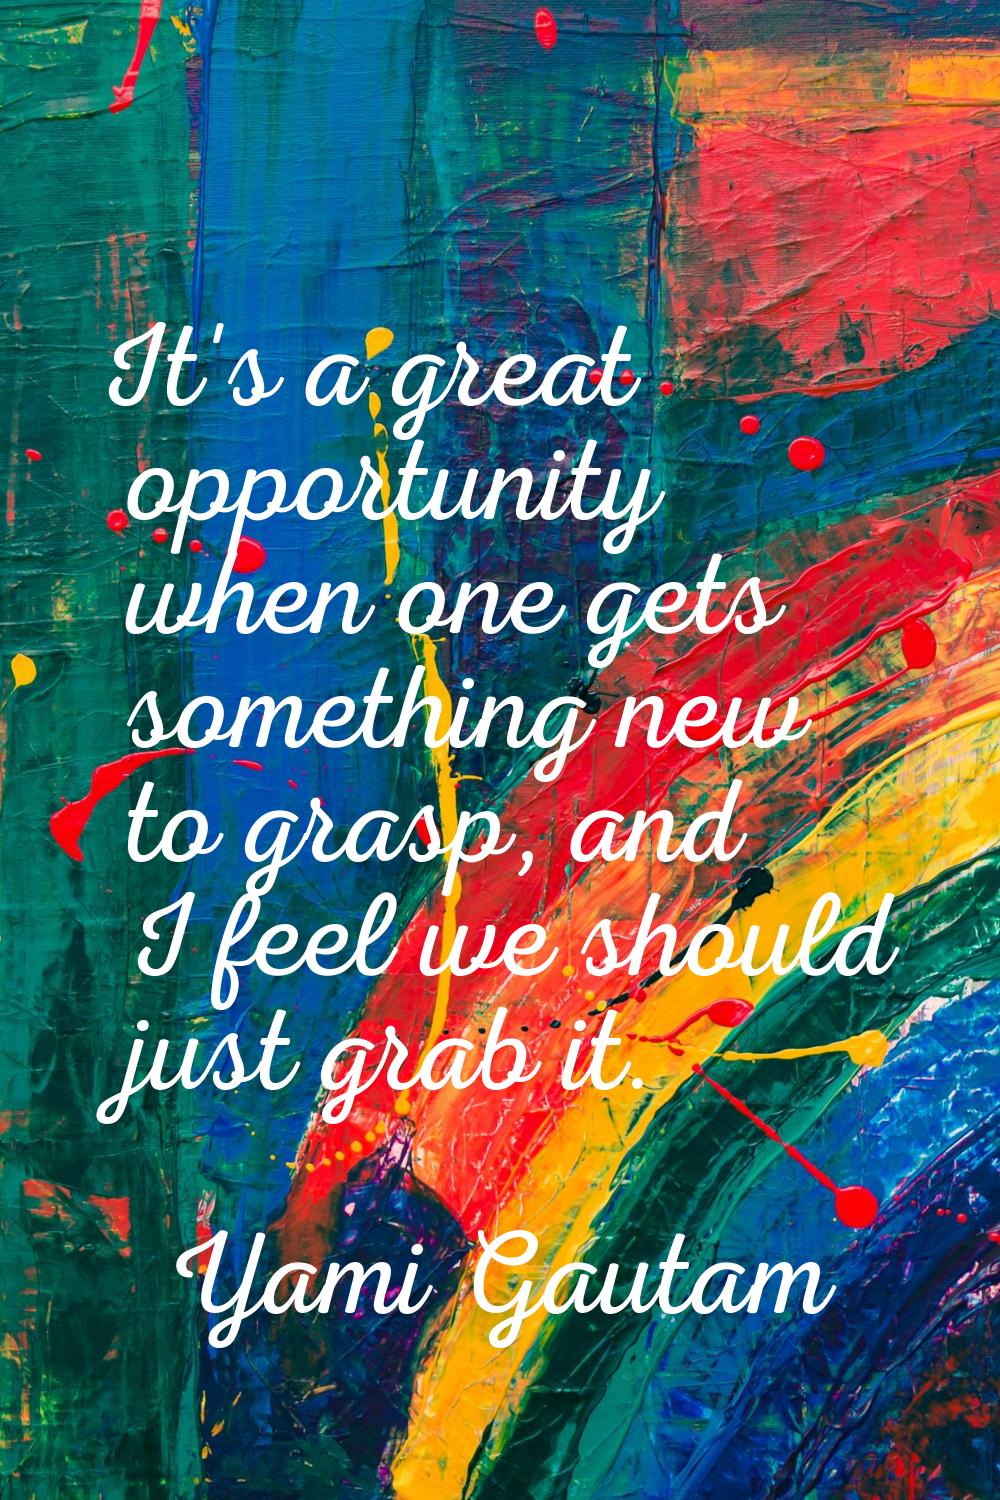 It's a great opportunity when one gets something new to grasp, and I feel we should just grab it.